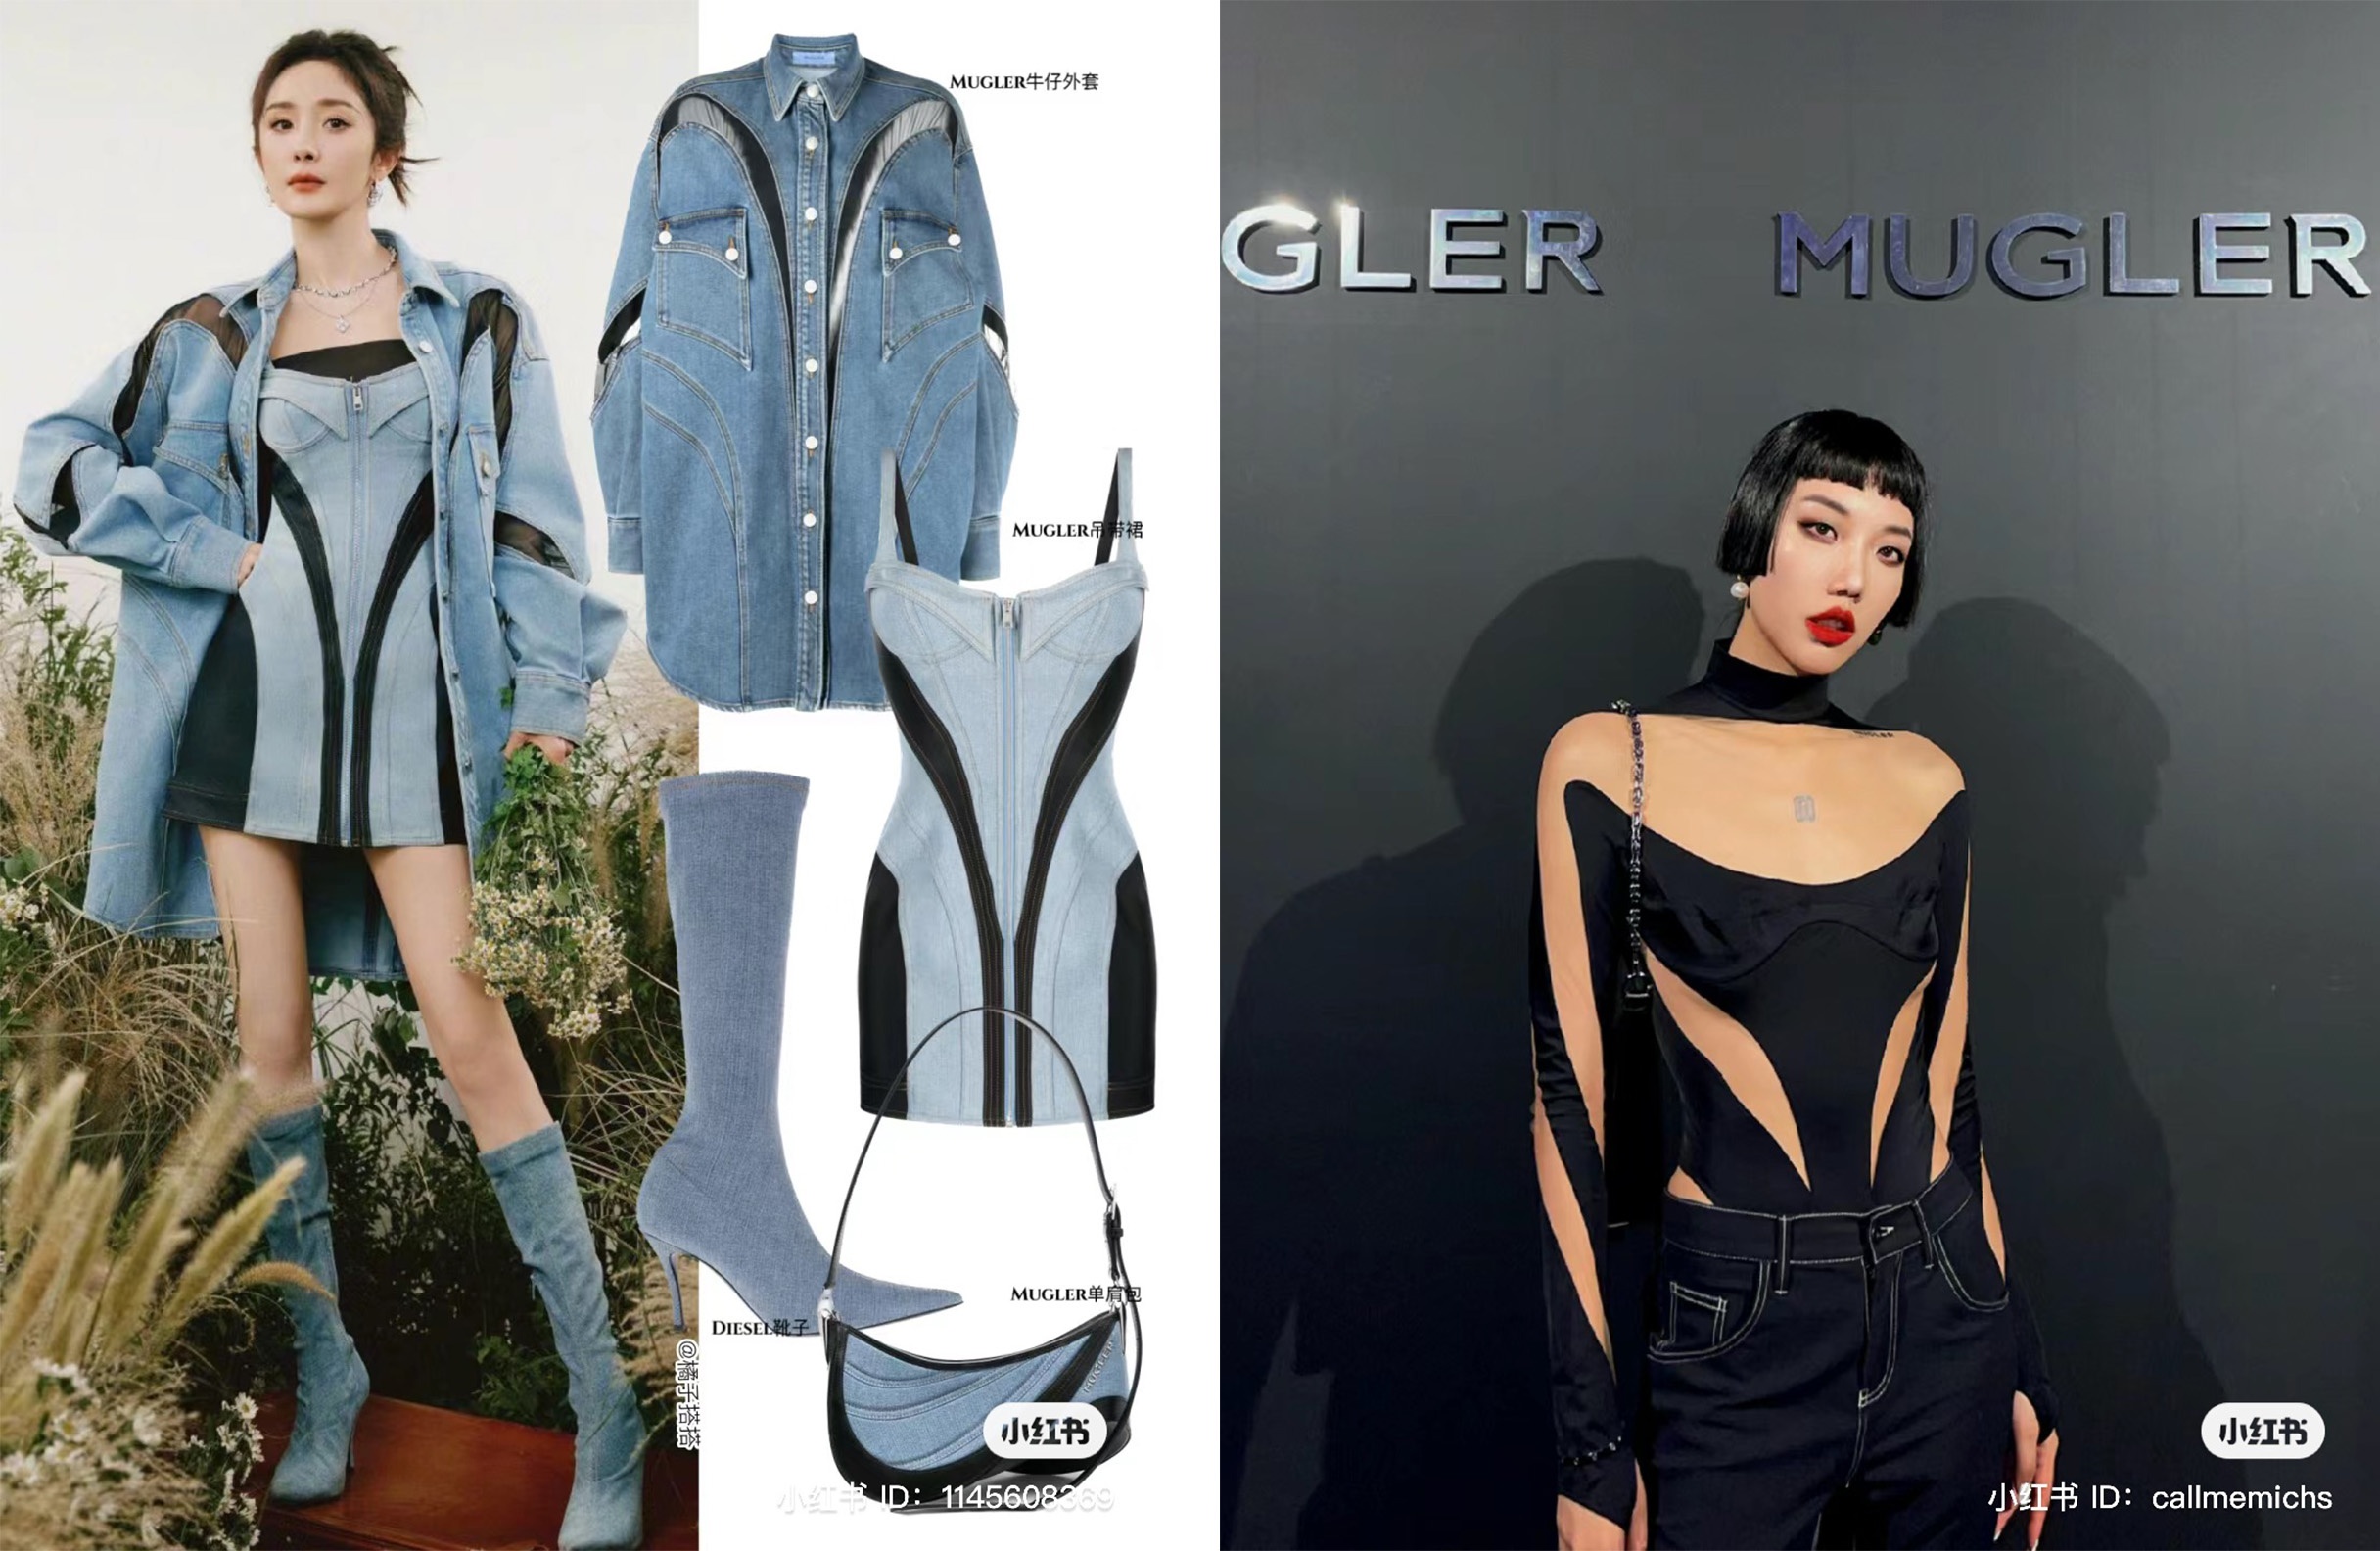 Mugler is climbing in popularity in China thanks to the ongoing Y2K trend. Photo: Xiaohongshu